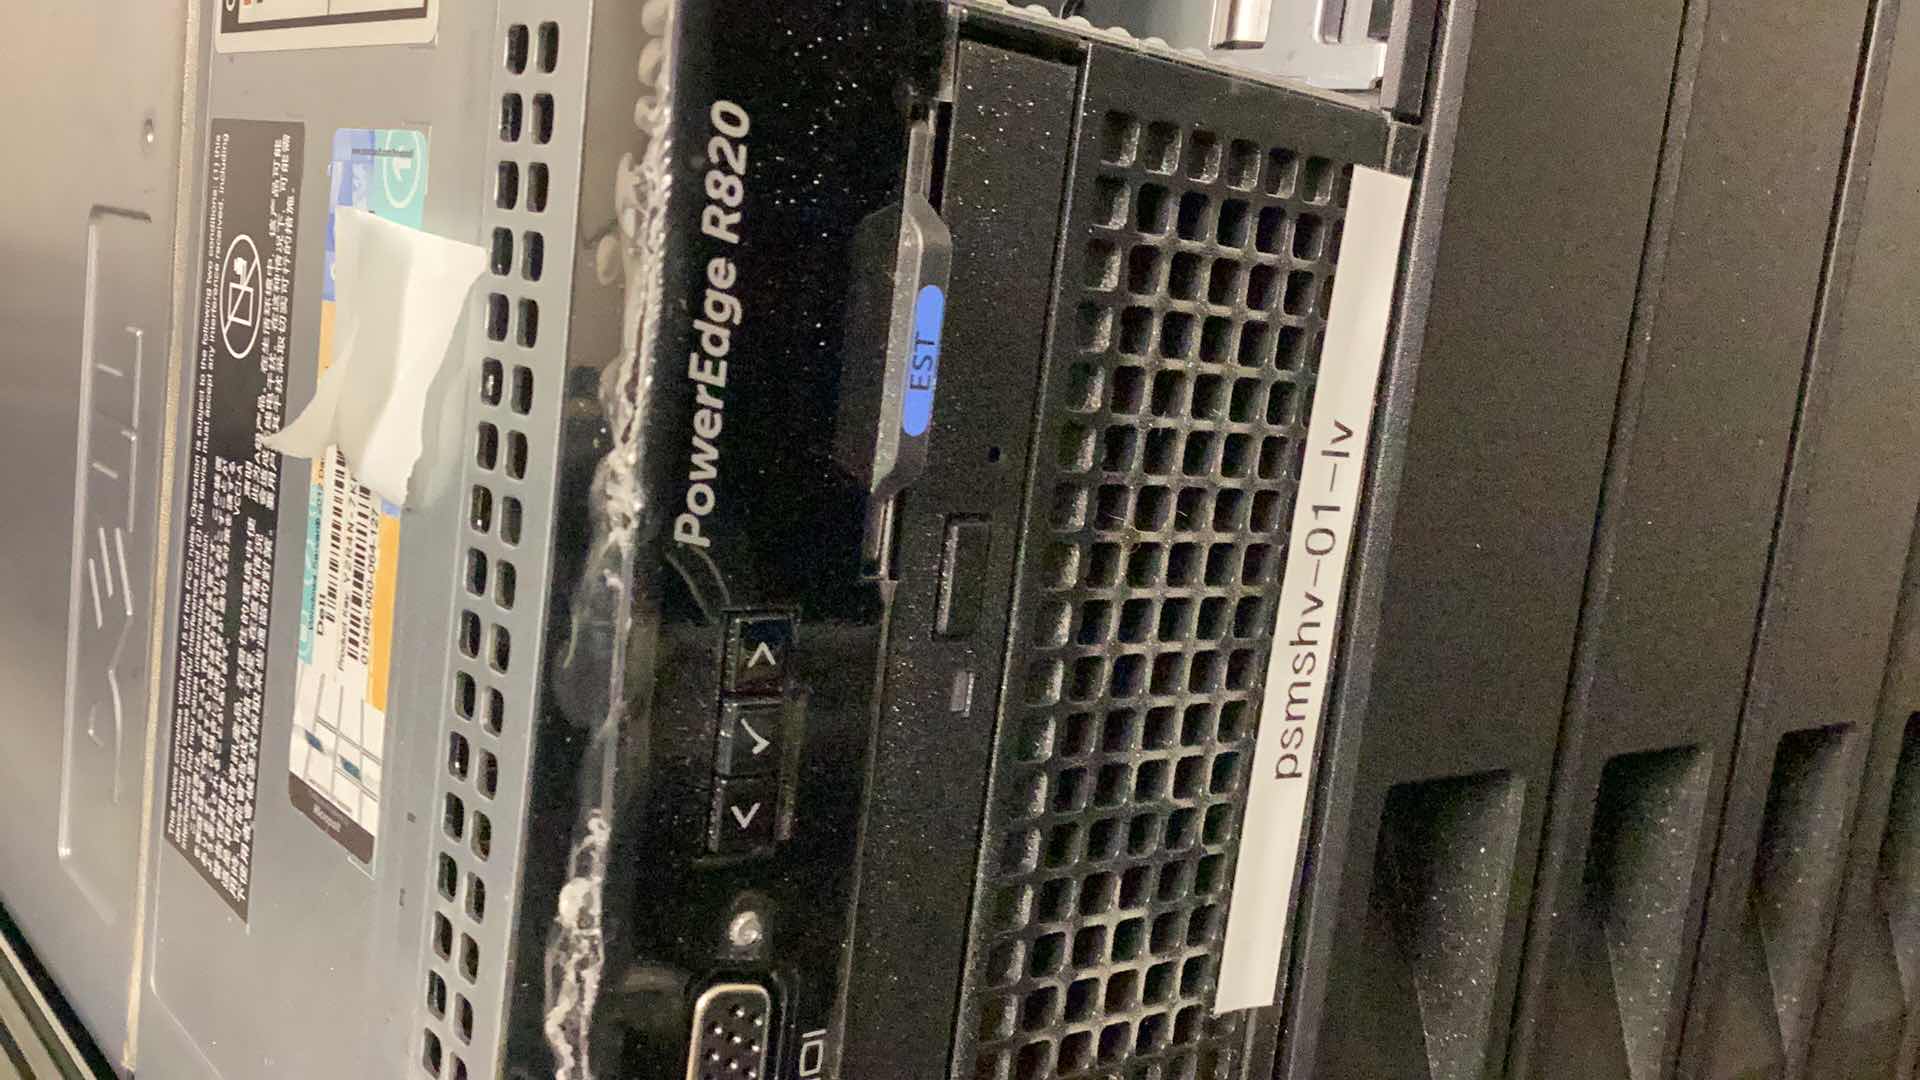 Photo 3 of DELL POWEREDGE R820 WITH WINDOWS SERVER COA (BUYER TO DISASSEMBLE & REMOVE FROM 2ND STORY OFFICE BUILDING W ELEVATOR)